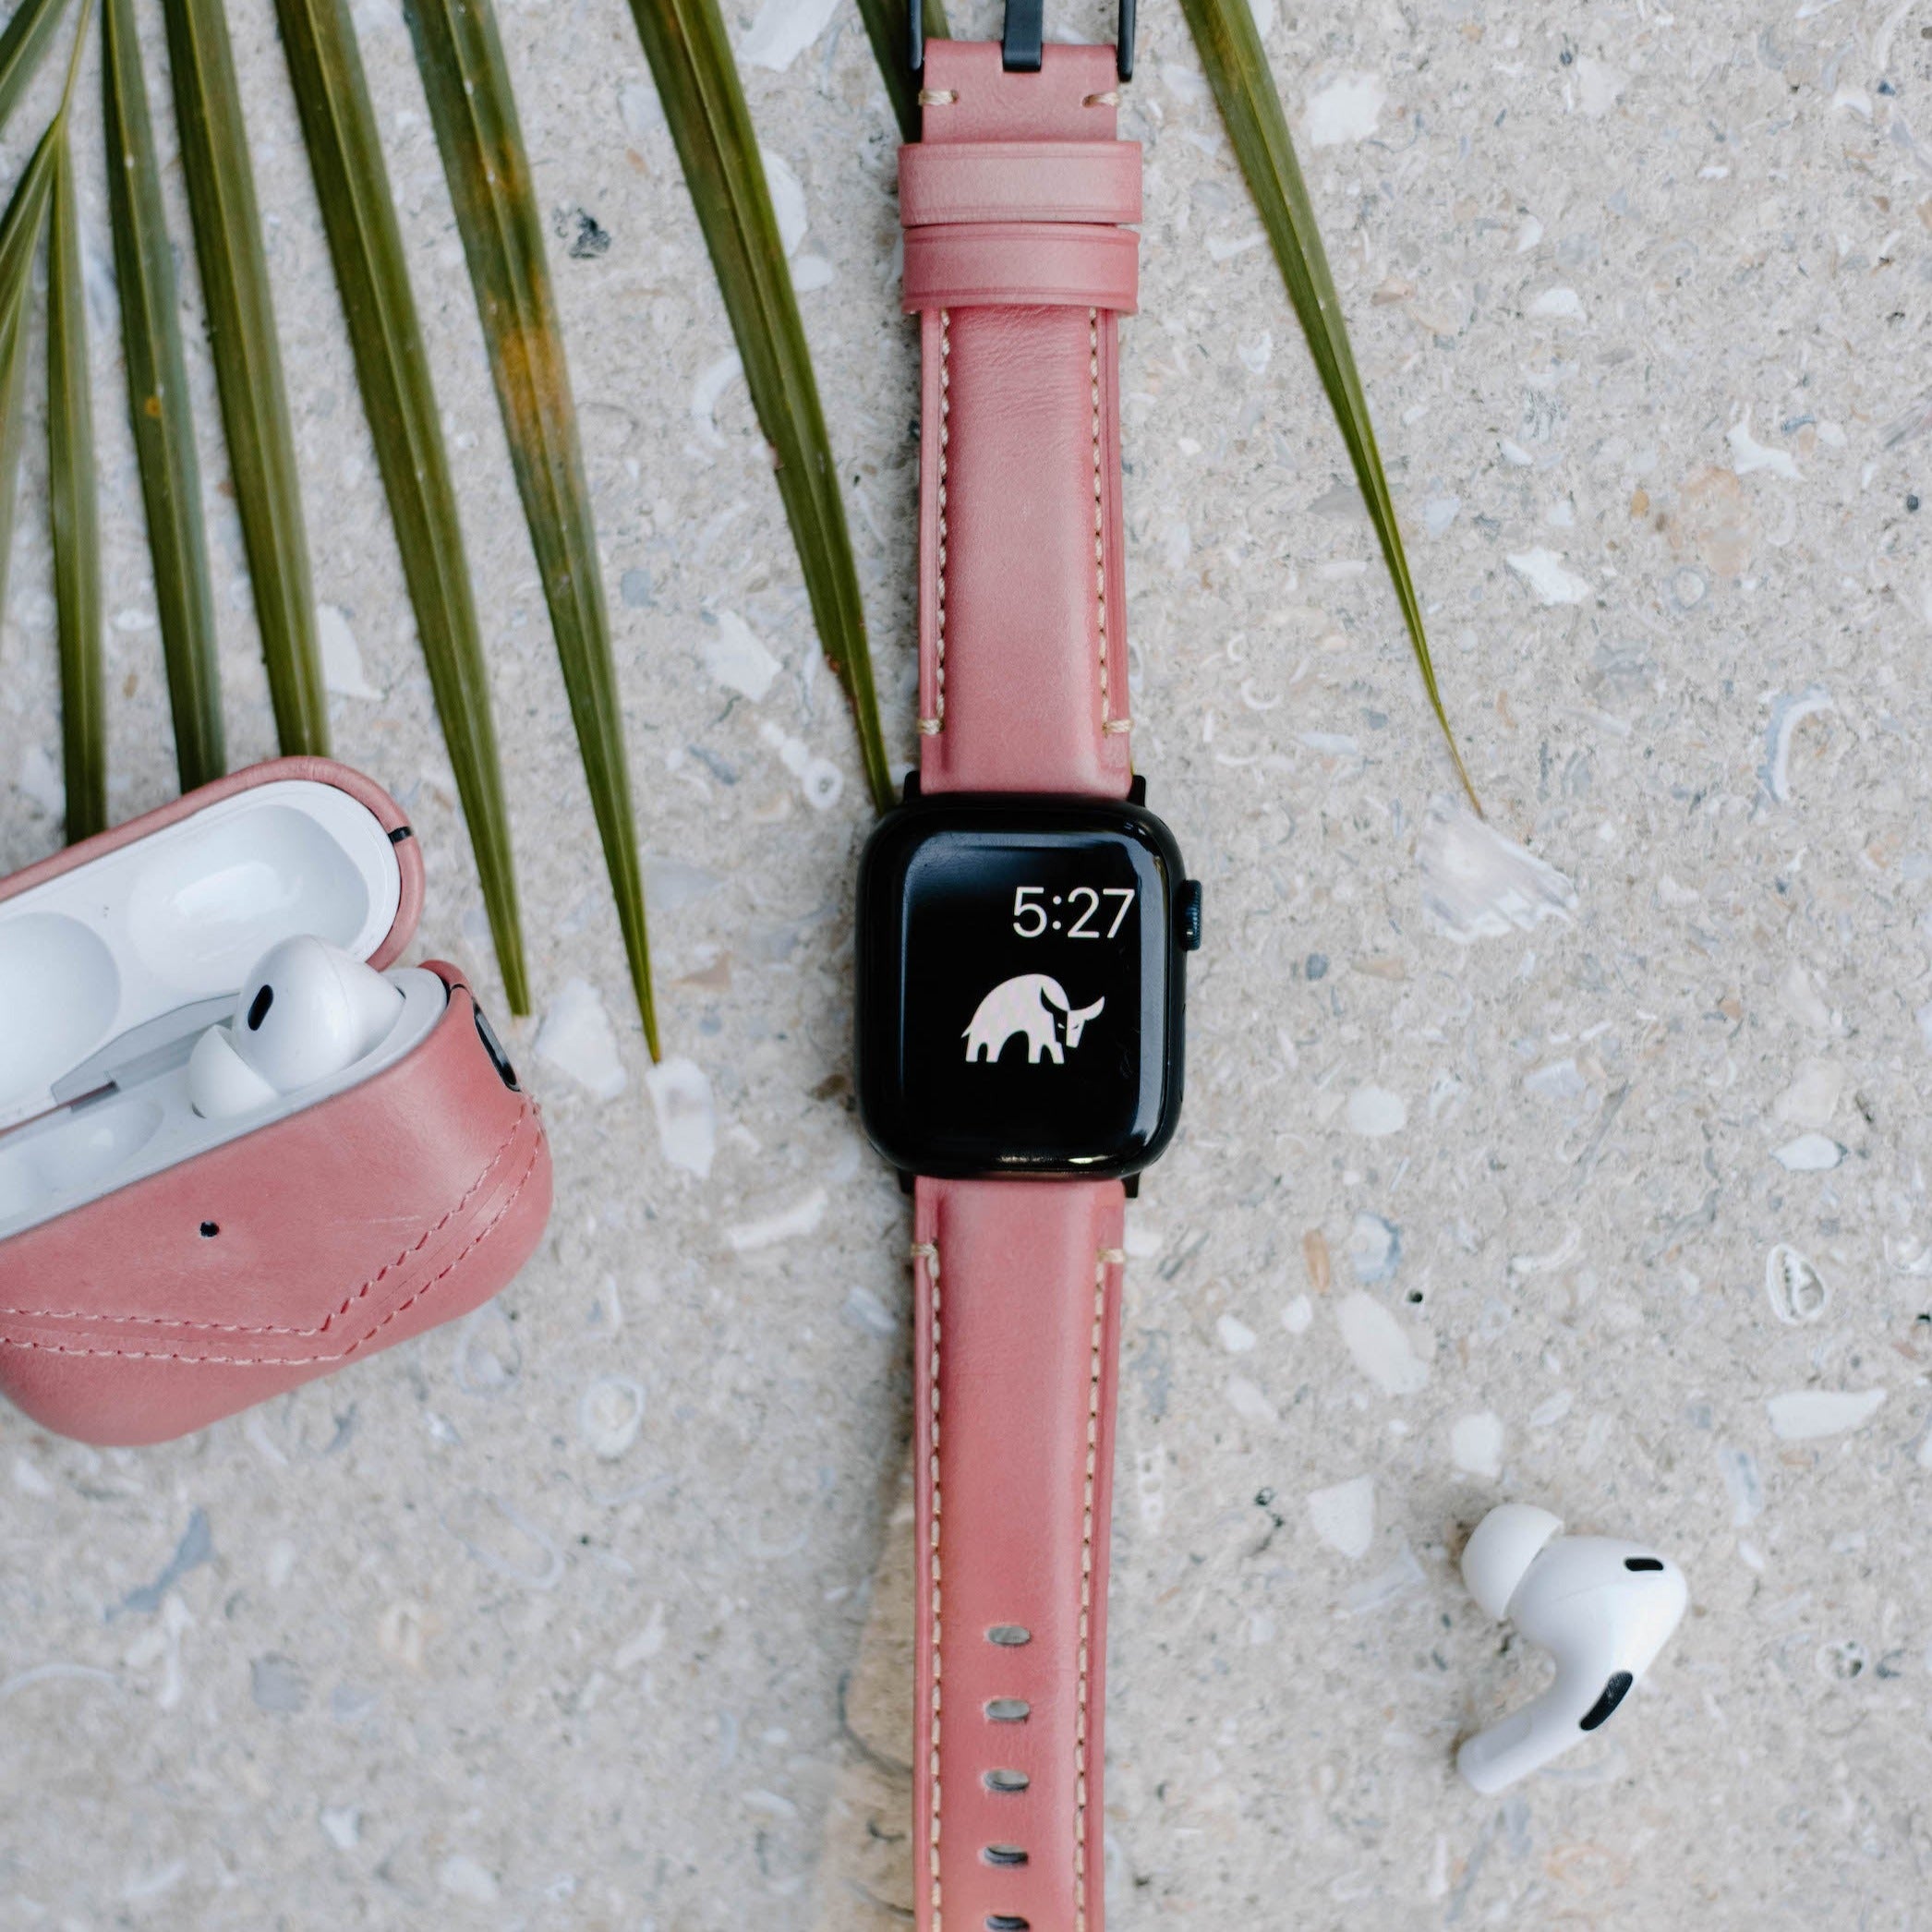 Leather Apple Watch Strap - South Beach